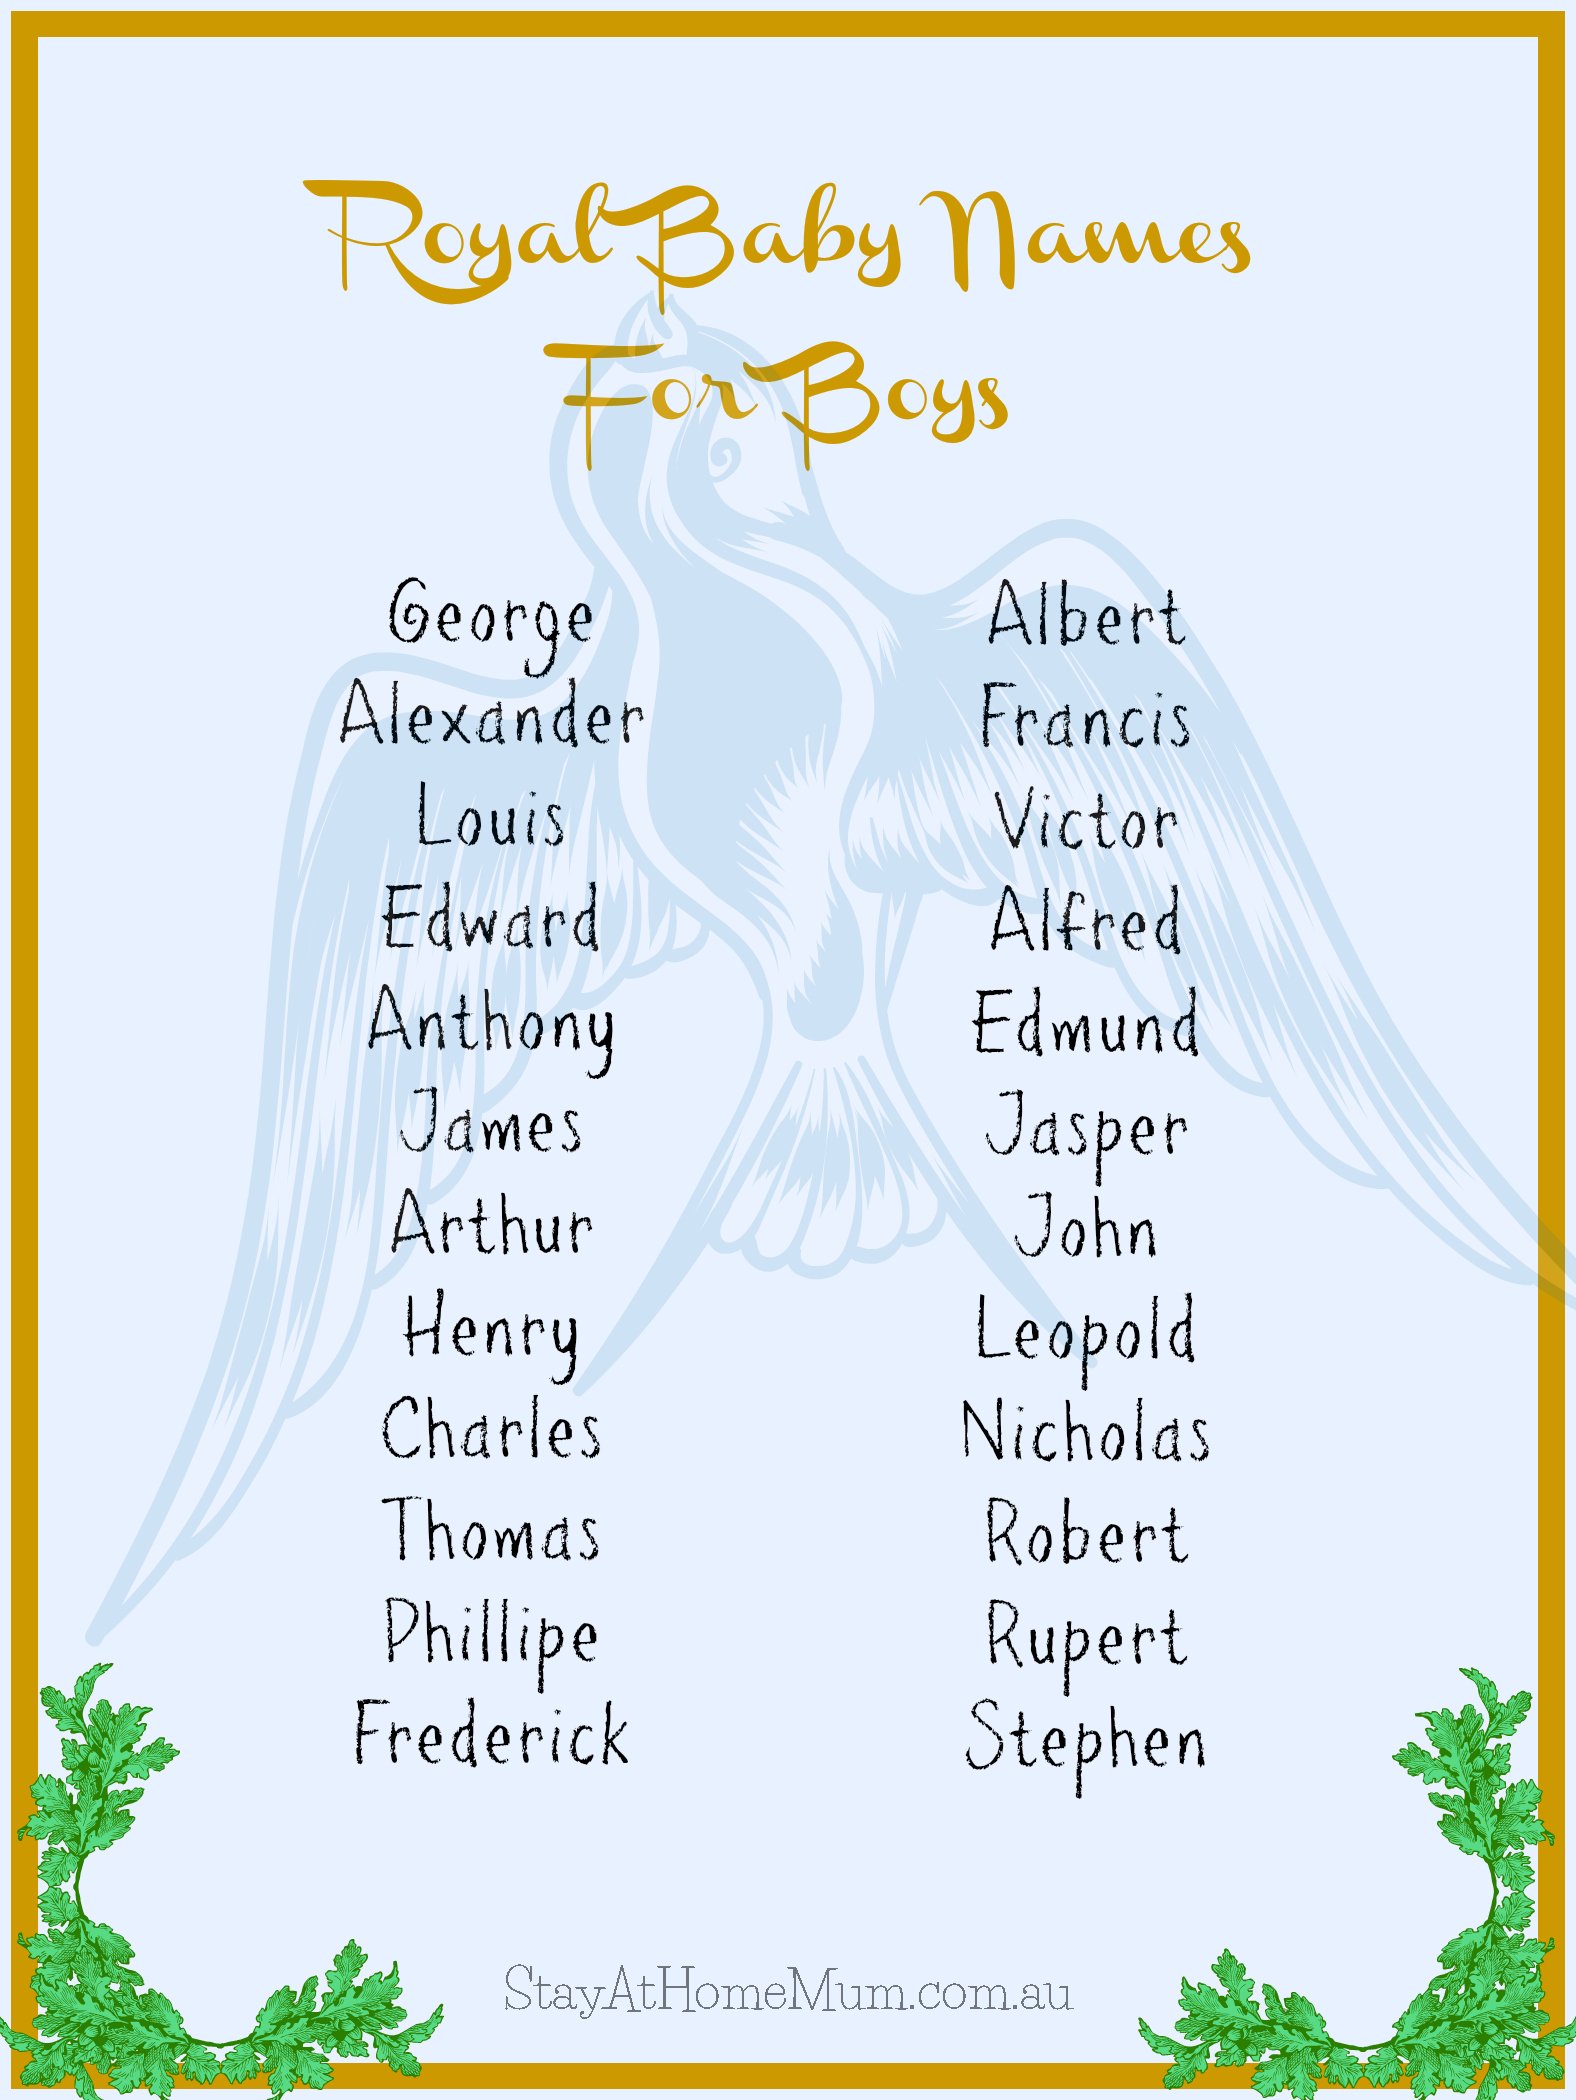 Royal Baby Names For Boys And Girls